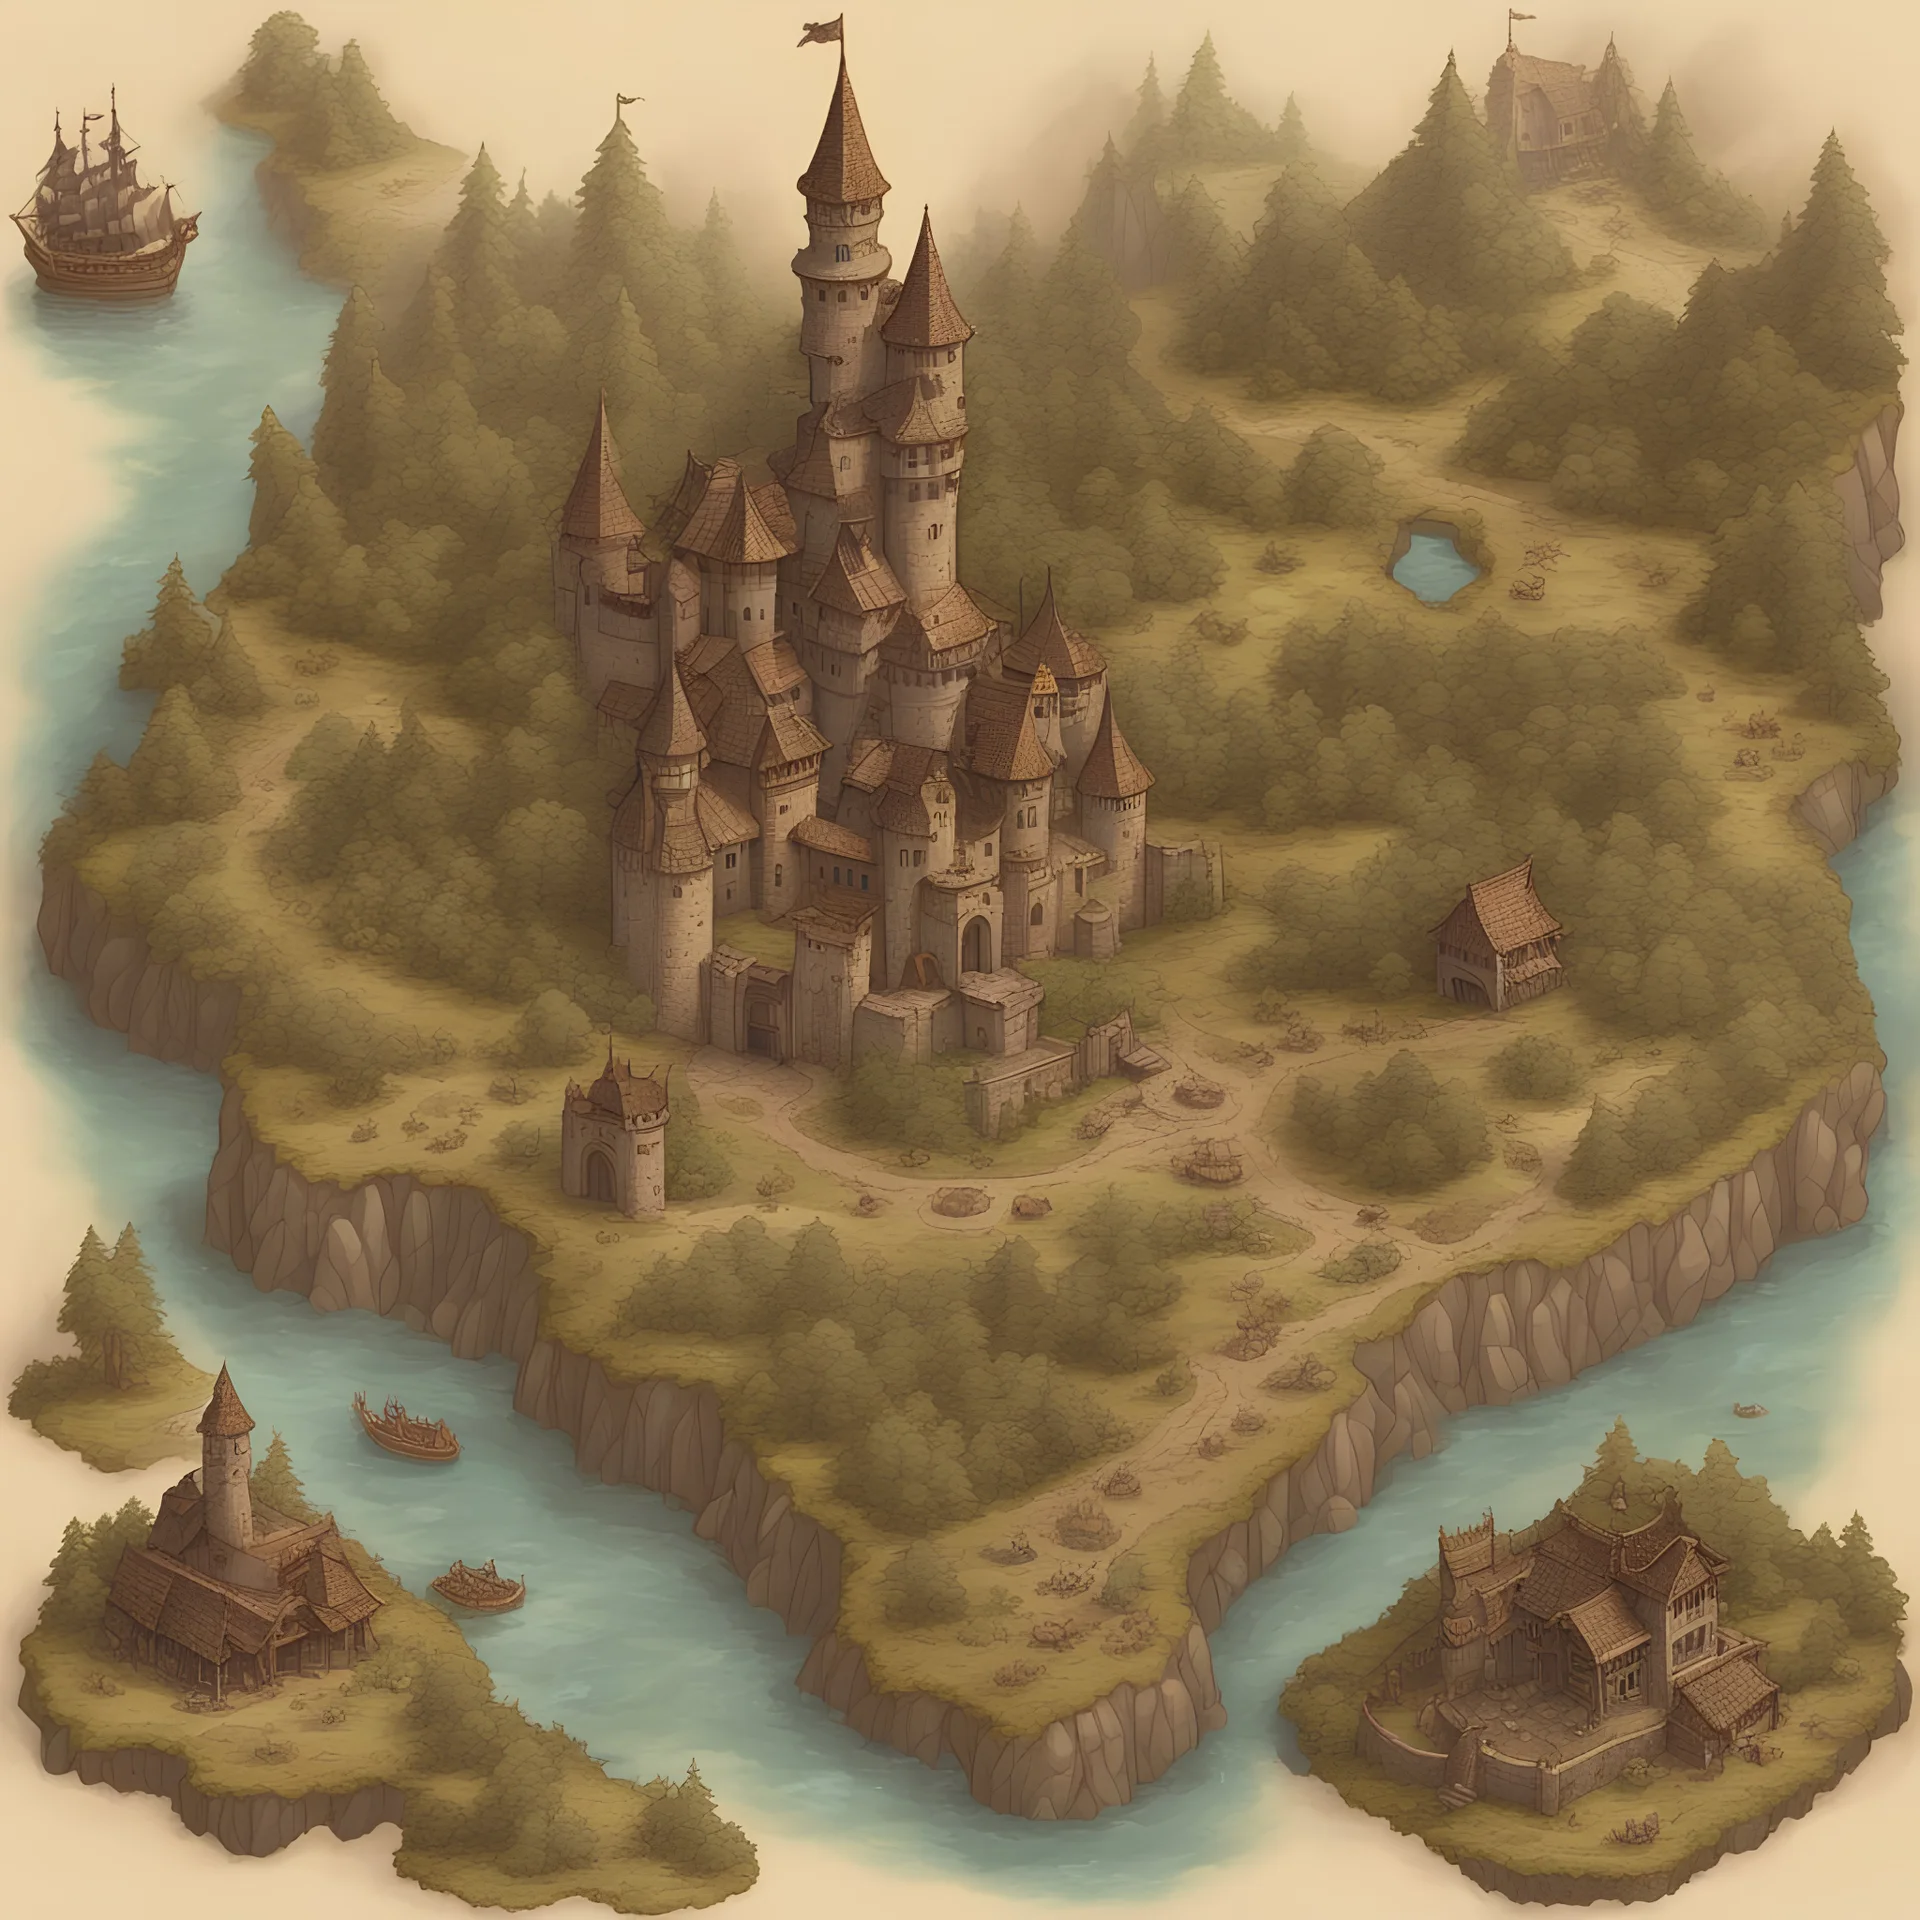 high quality very detailed fantasy map with wizard tower, pirate ship, castle and corrupted forest